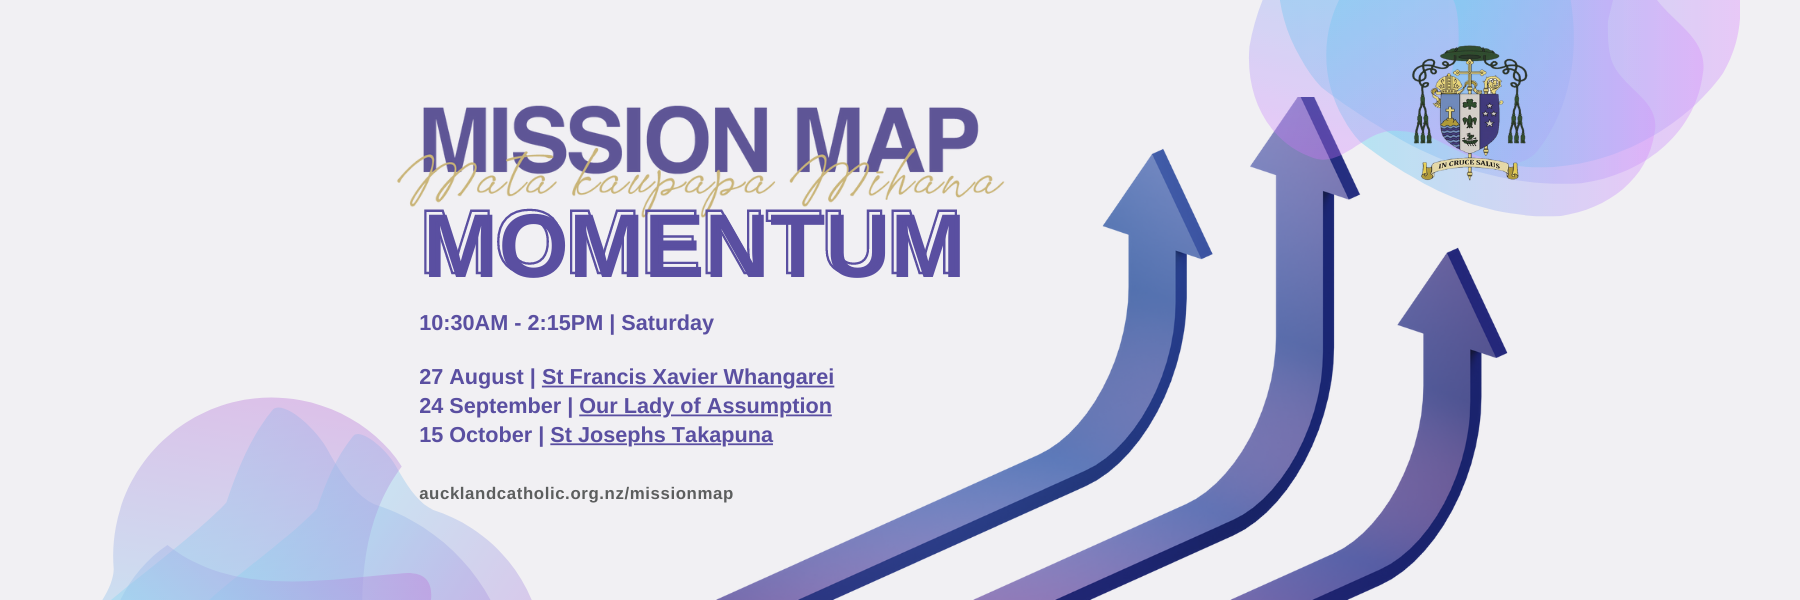 MISSION MAP MOMENTUM (Email Banner)